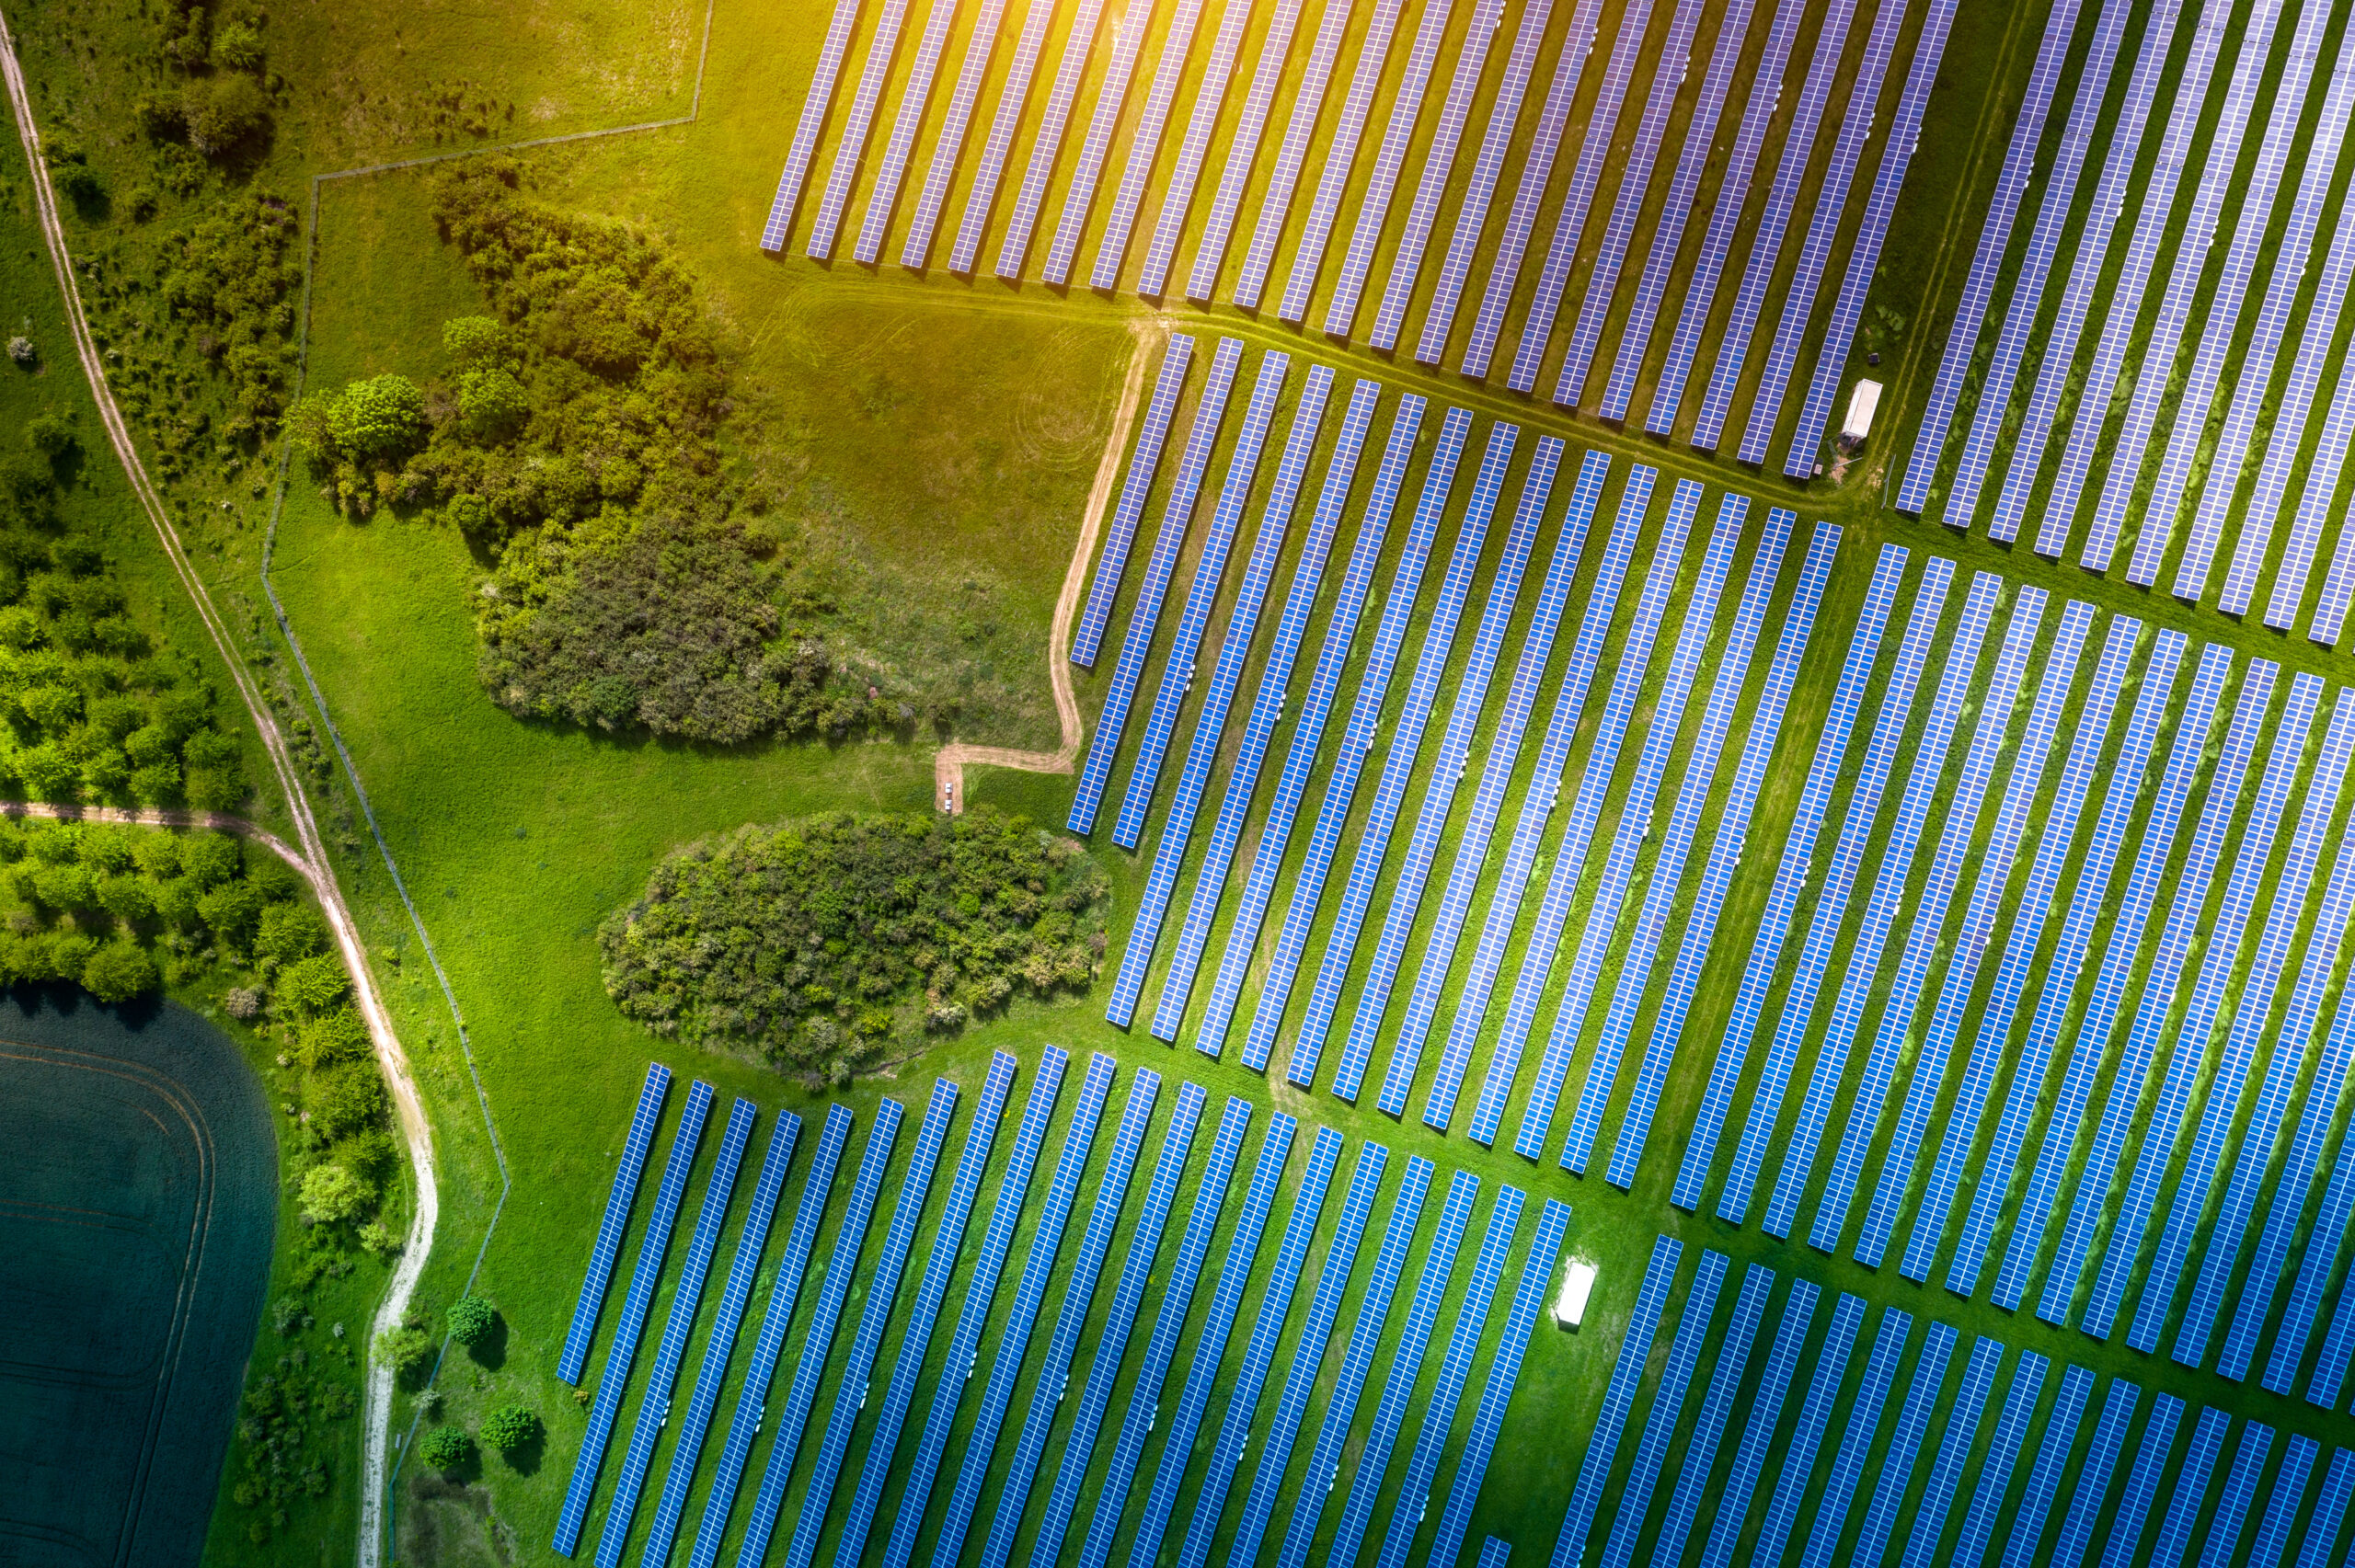 Aerial view over Solar cells energy farm in countryside landscape